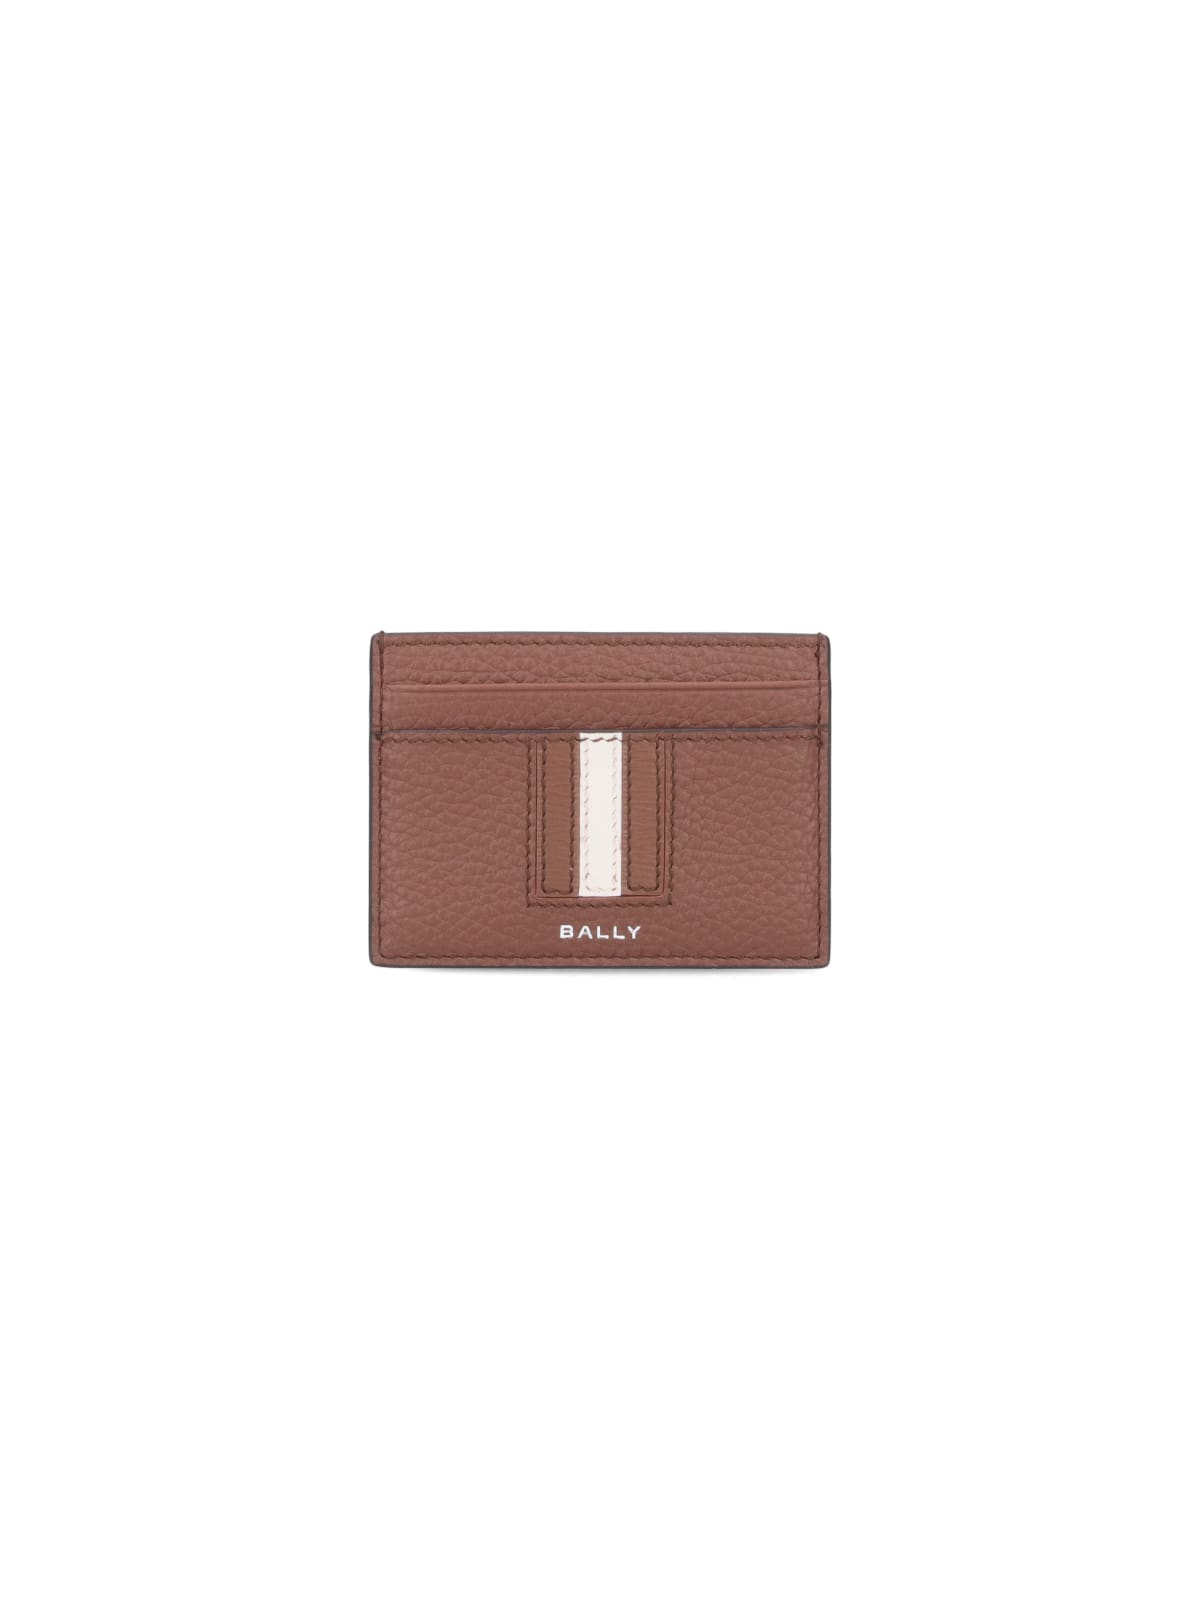 Bally Ribbon Card Holder In Brown